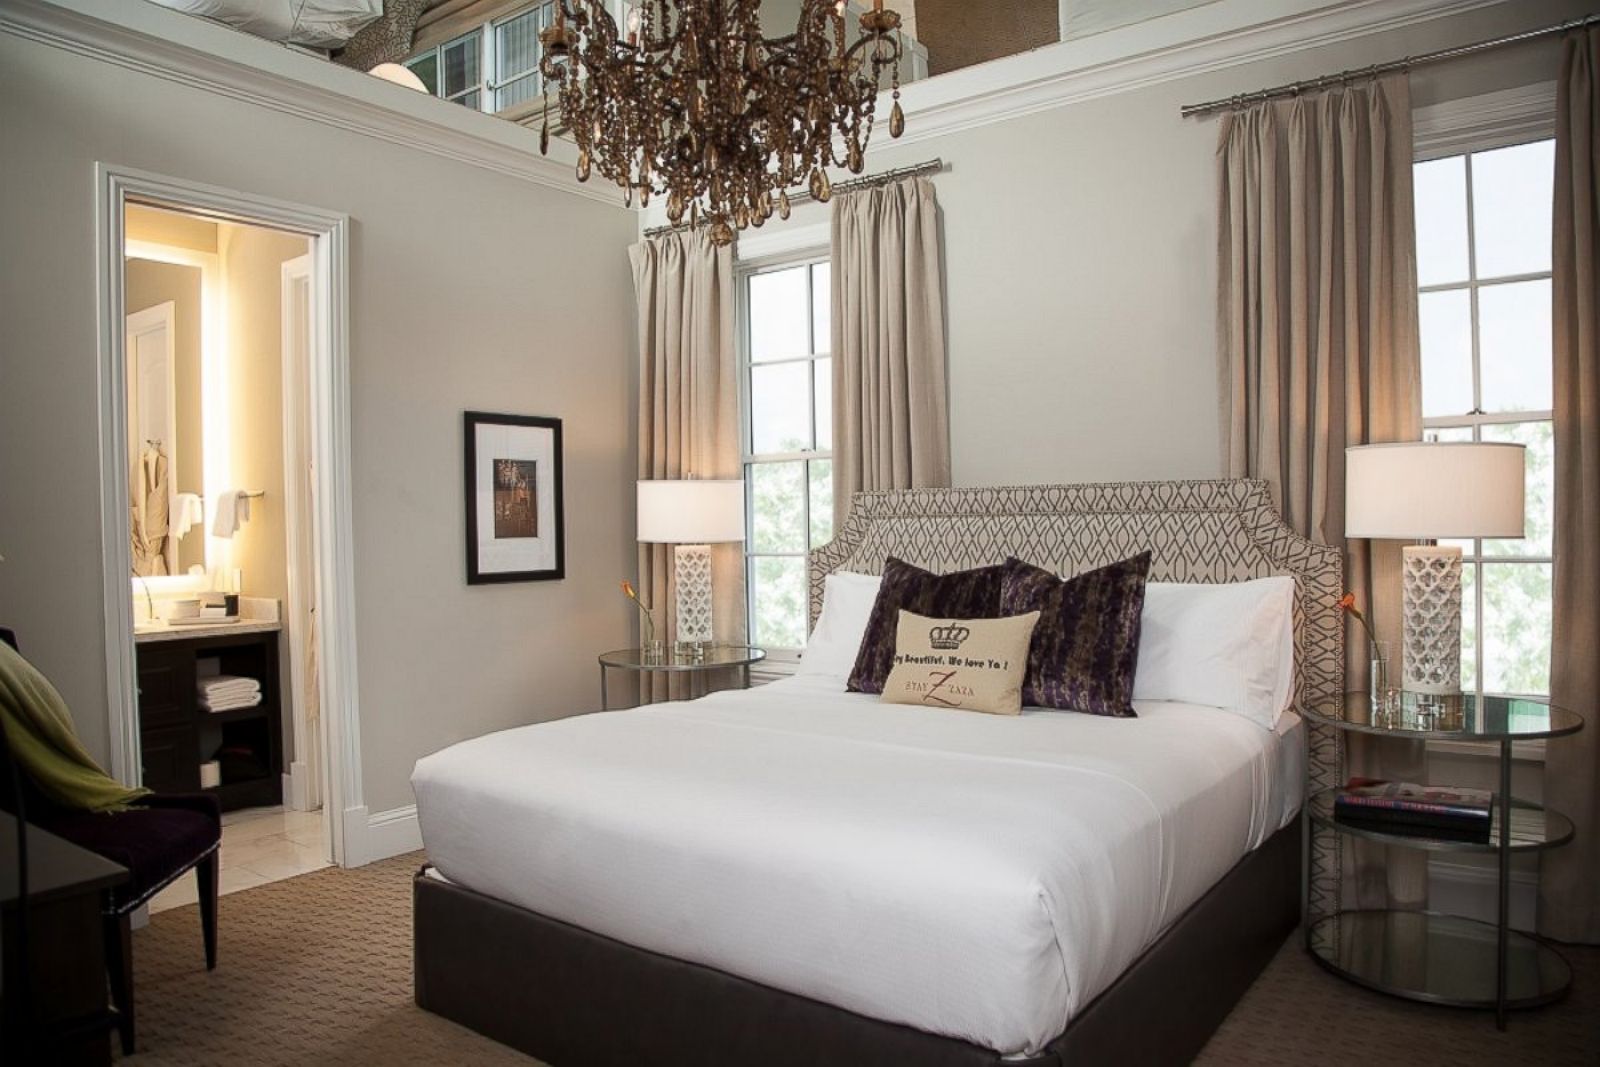 Hotel Suite of the Week: Bungalow #8 at Hotel ZaZa Dallas Photos - ABC News